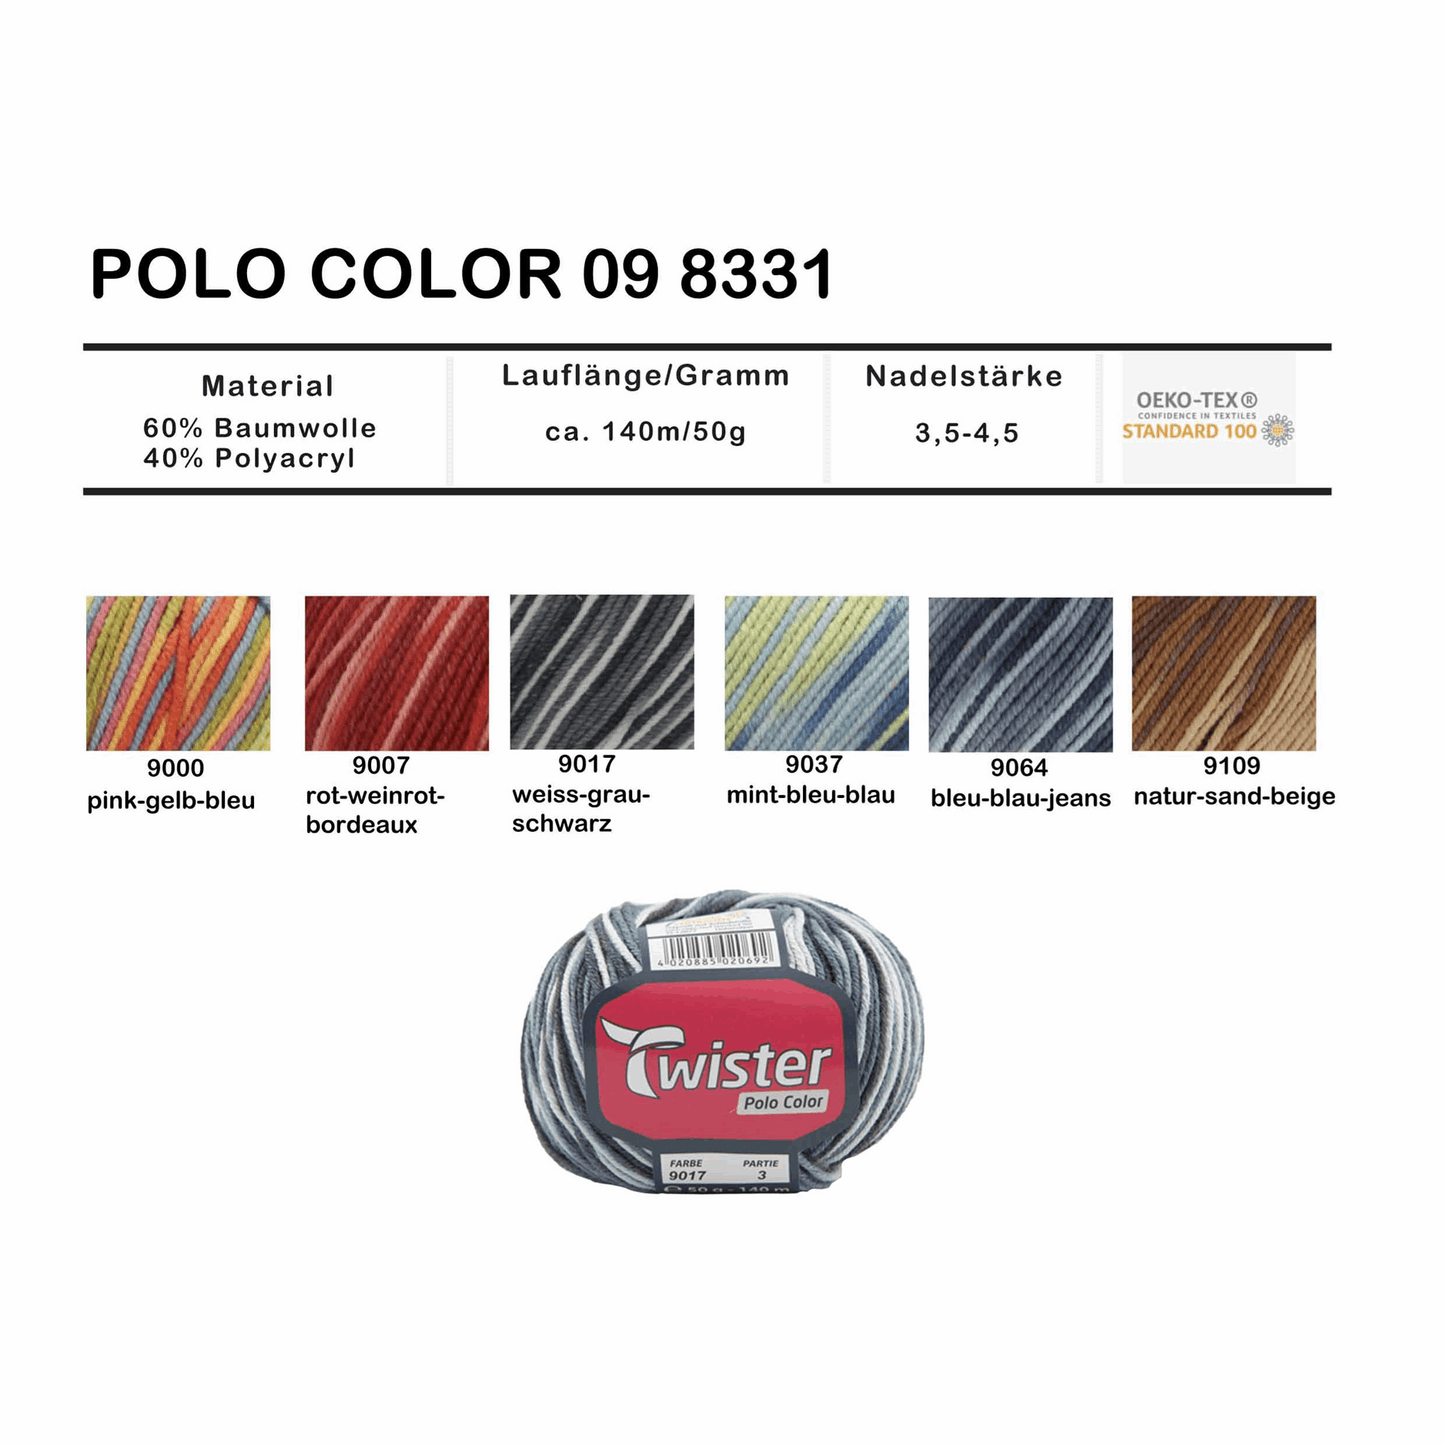 Twister Polo color, 50g, 98331, Farbe nat/sand/bei 9109